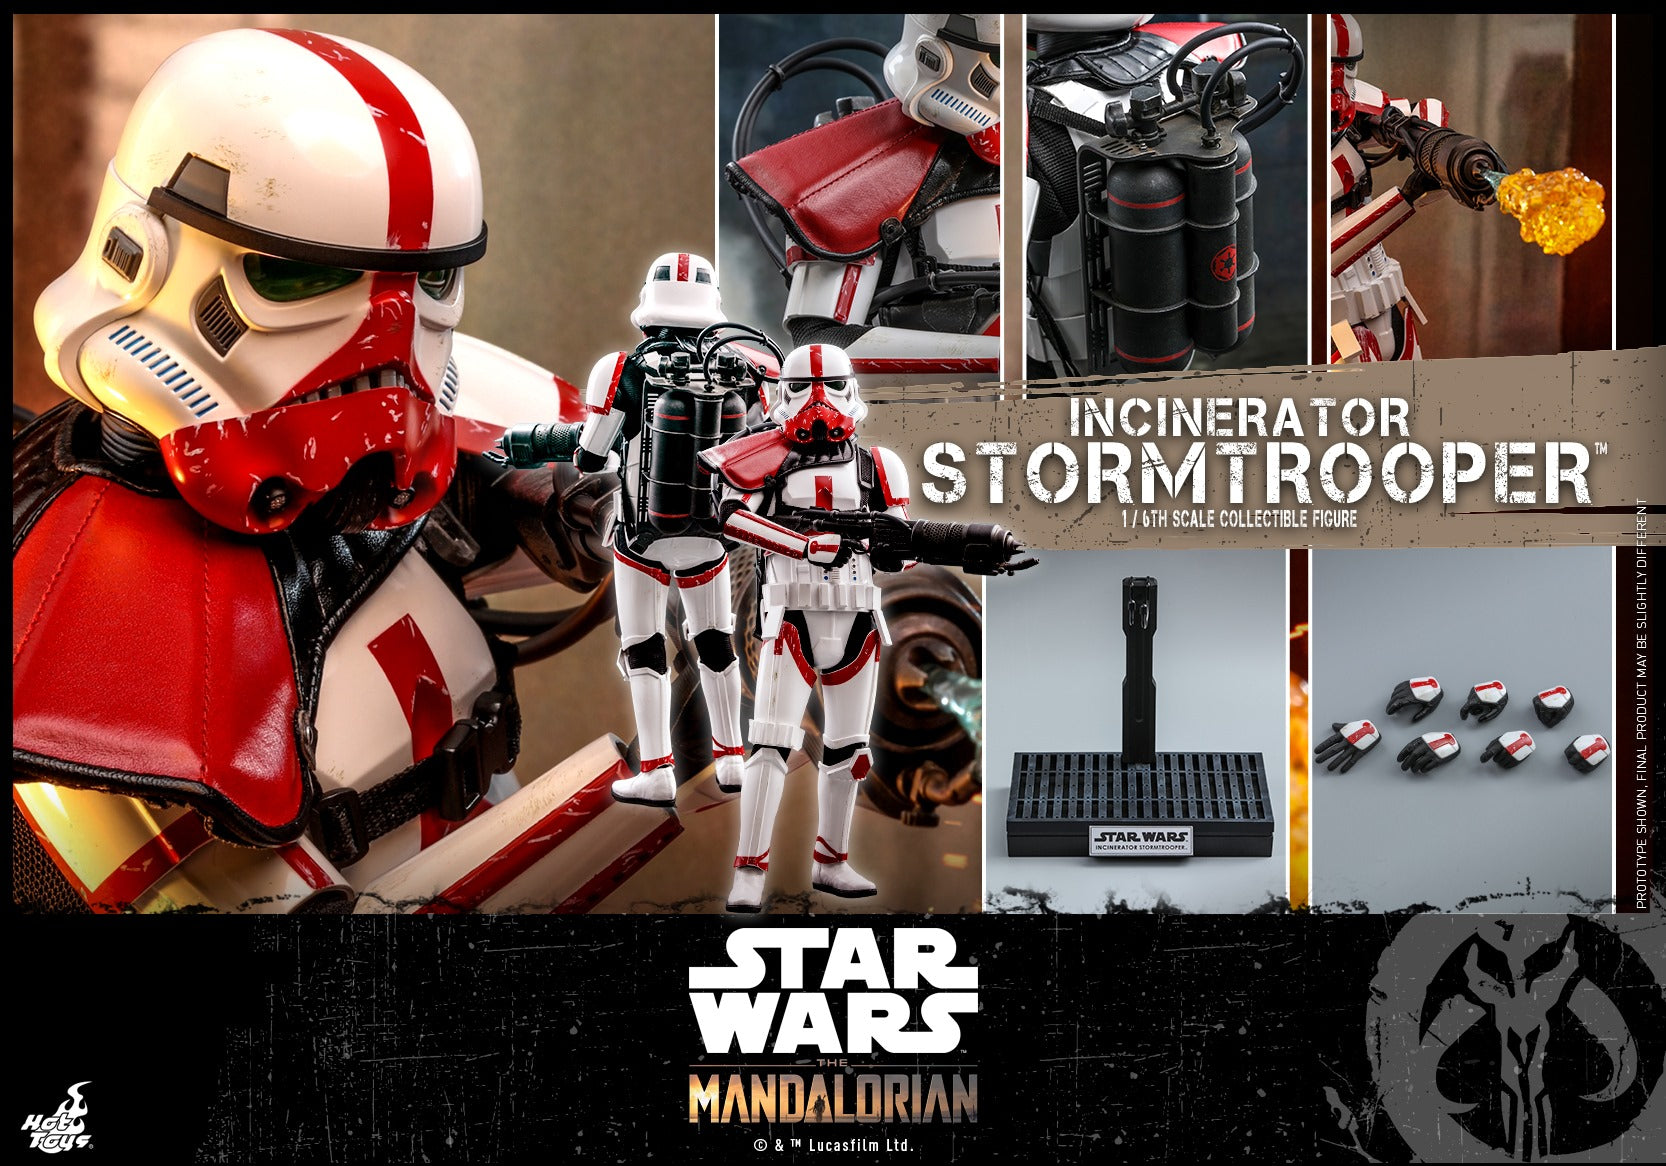 Hot Toys - TMS012 - Star Wars: The Mandalorian - Incinerator Stormtrooper - Marvelous Toys